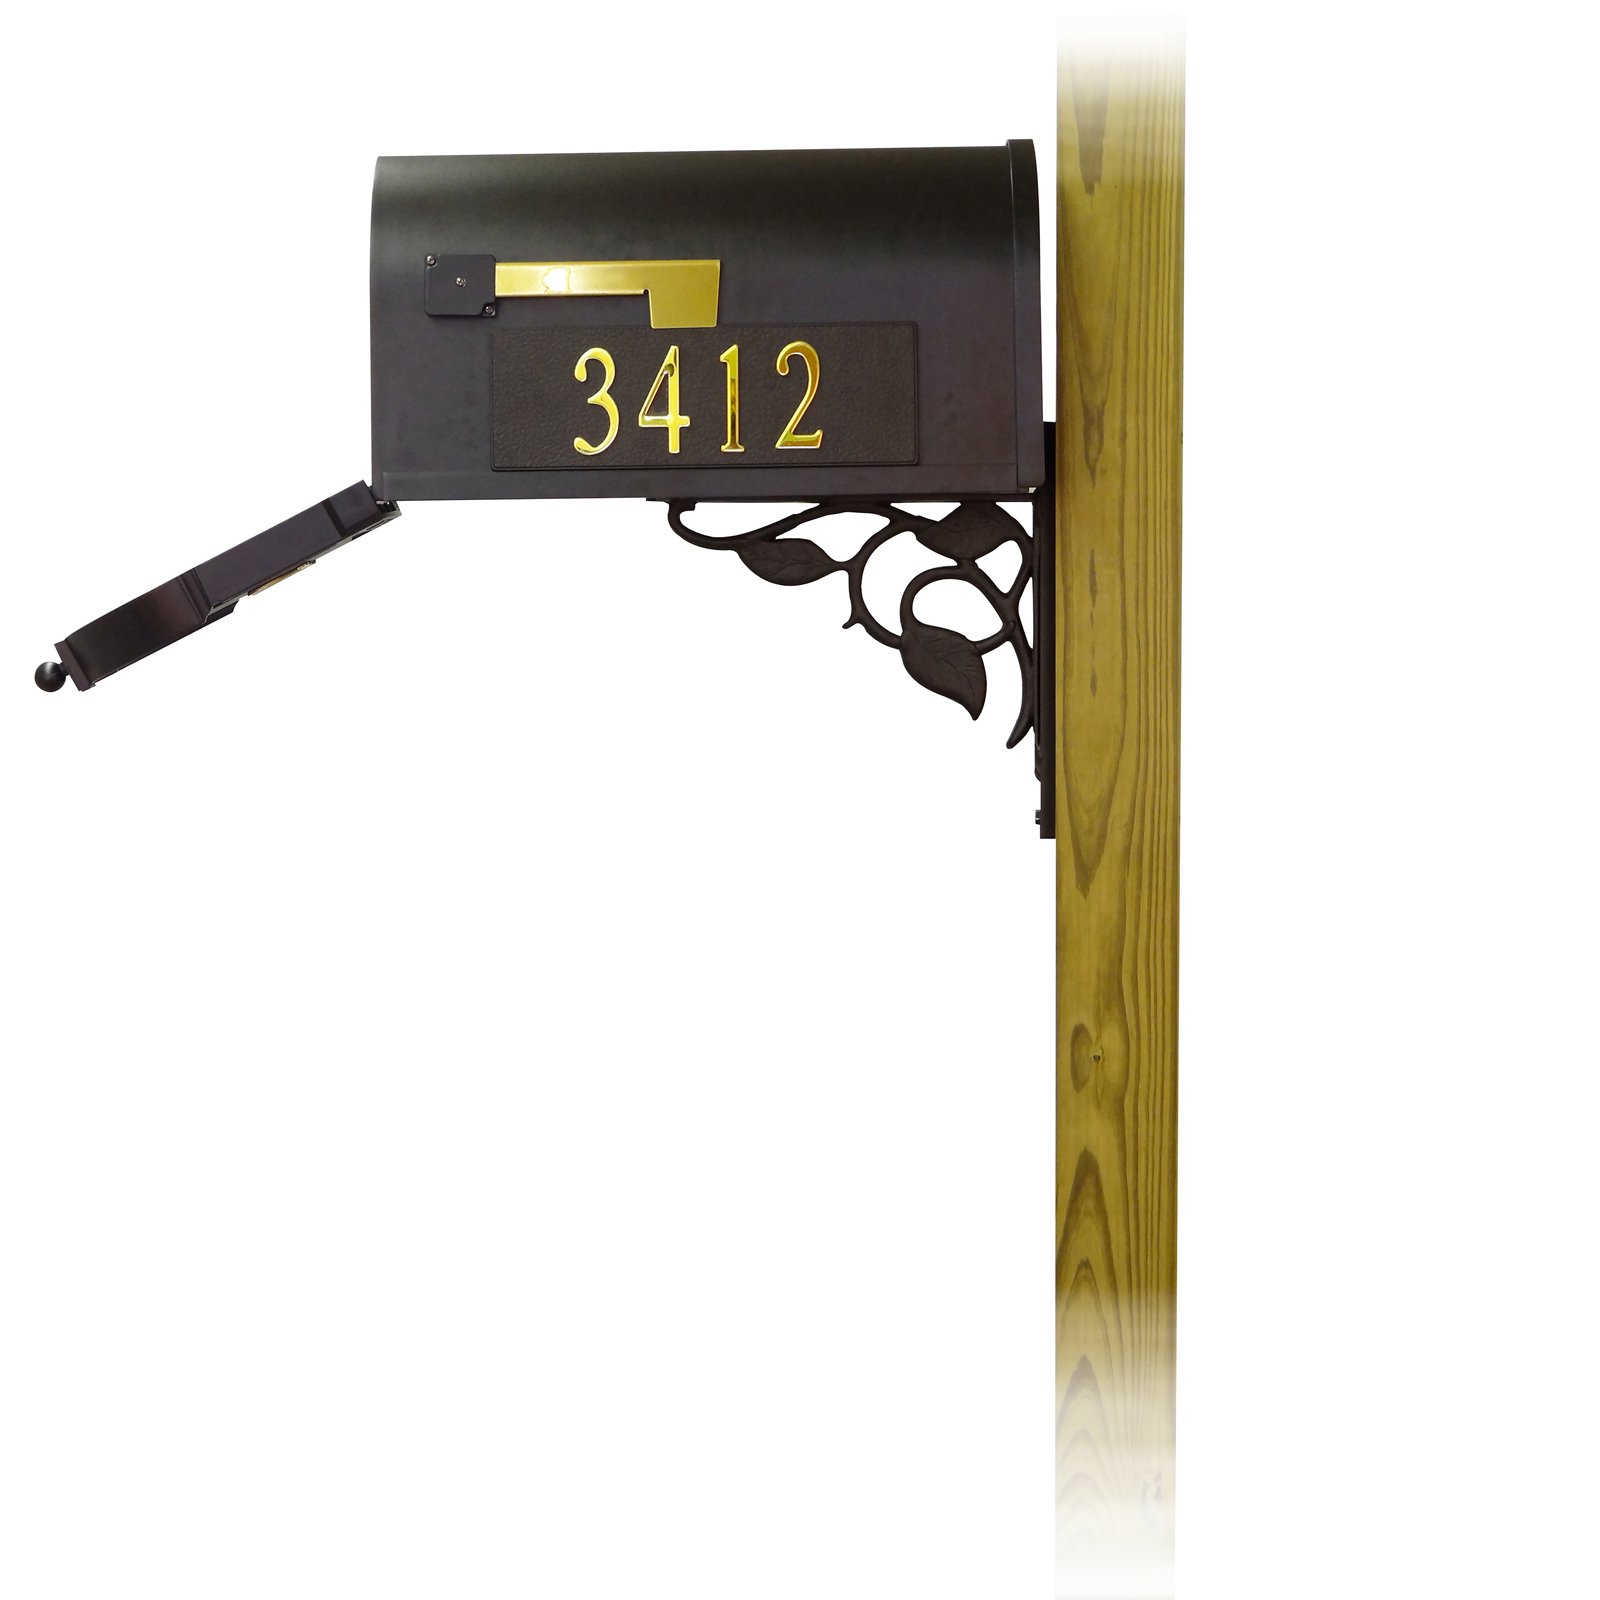 Special Lite Products Berkshire Curbside Mailbox with Front and Side Address Numbers and Floral Mailbox Mounting Bracket - image 3 of 4